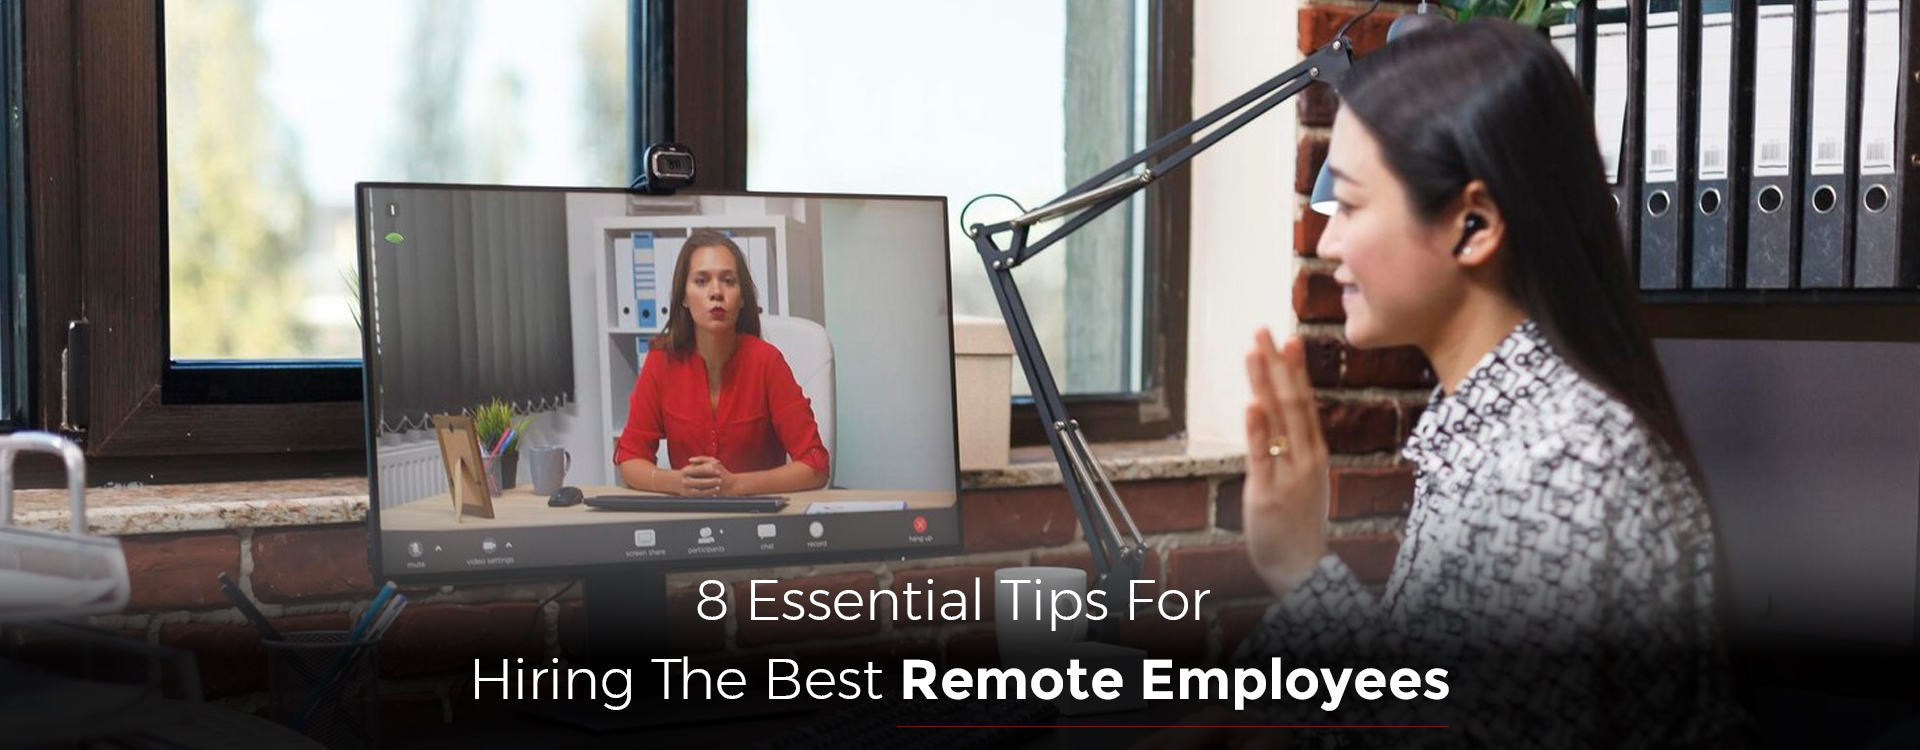 8 Essential Tips For Hiring The Best Remote Employees